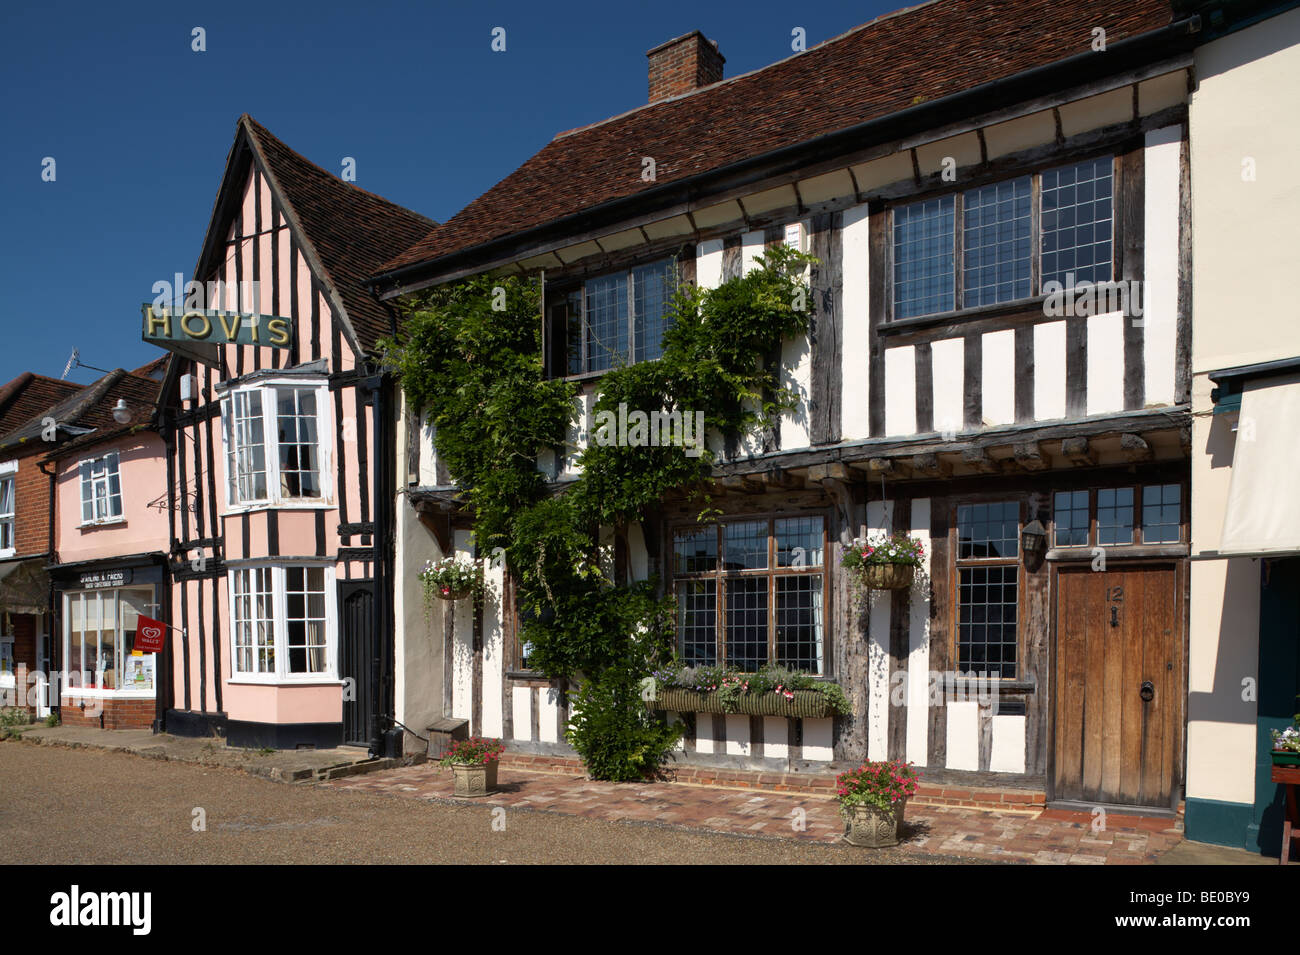 Great Britain England Suffolk Lavenham Market Square Timbered Houses Shops Stock Photo